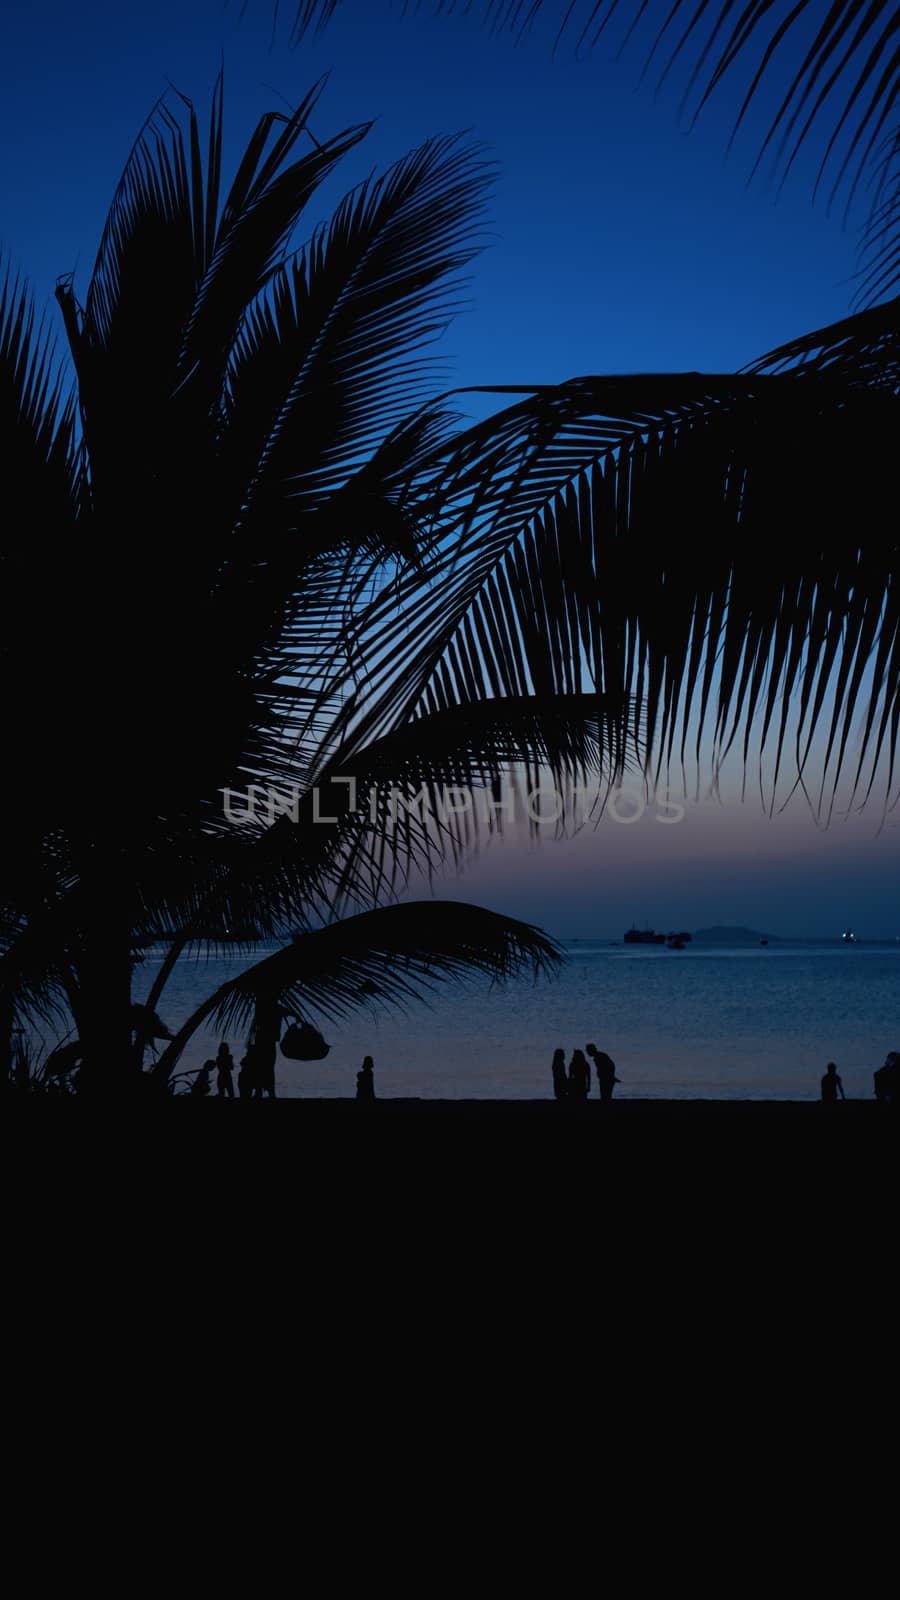 Silhouette of people on tropical beach at sunset - Tourists enjoying time in summer vacation - Travel, holidays and landscape concept - Focus on palm tree - vertical